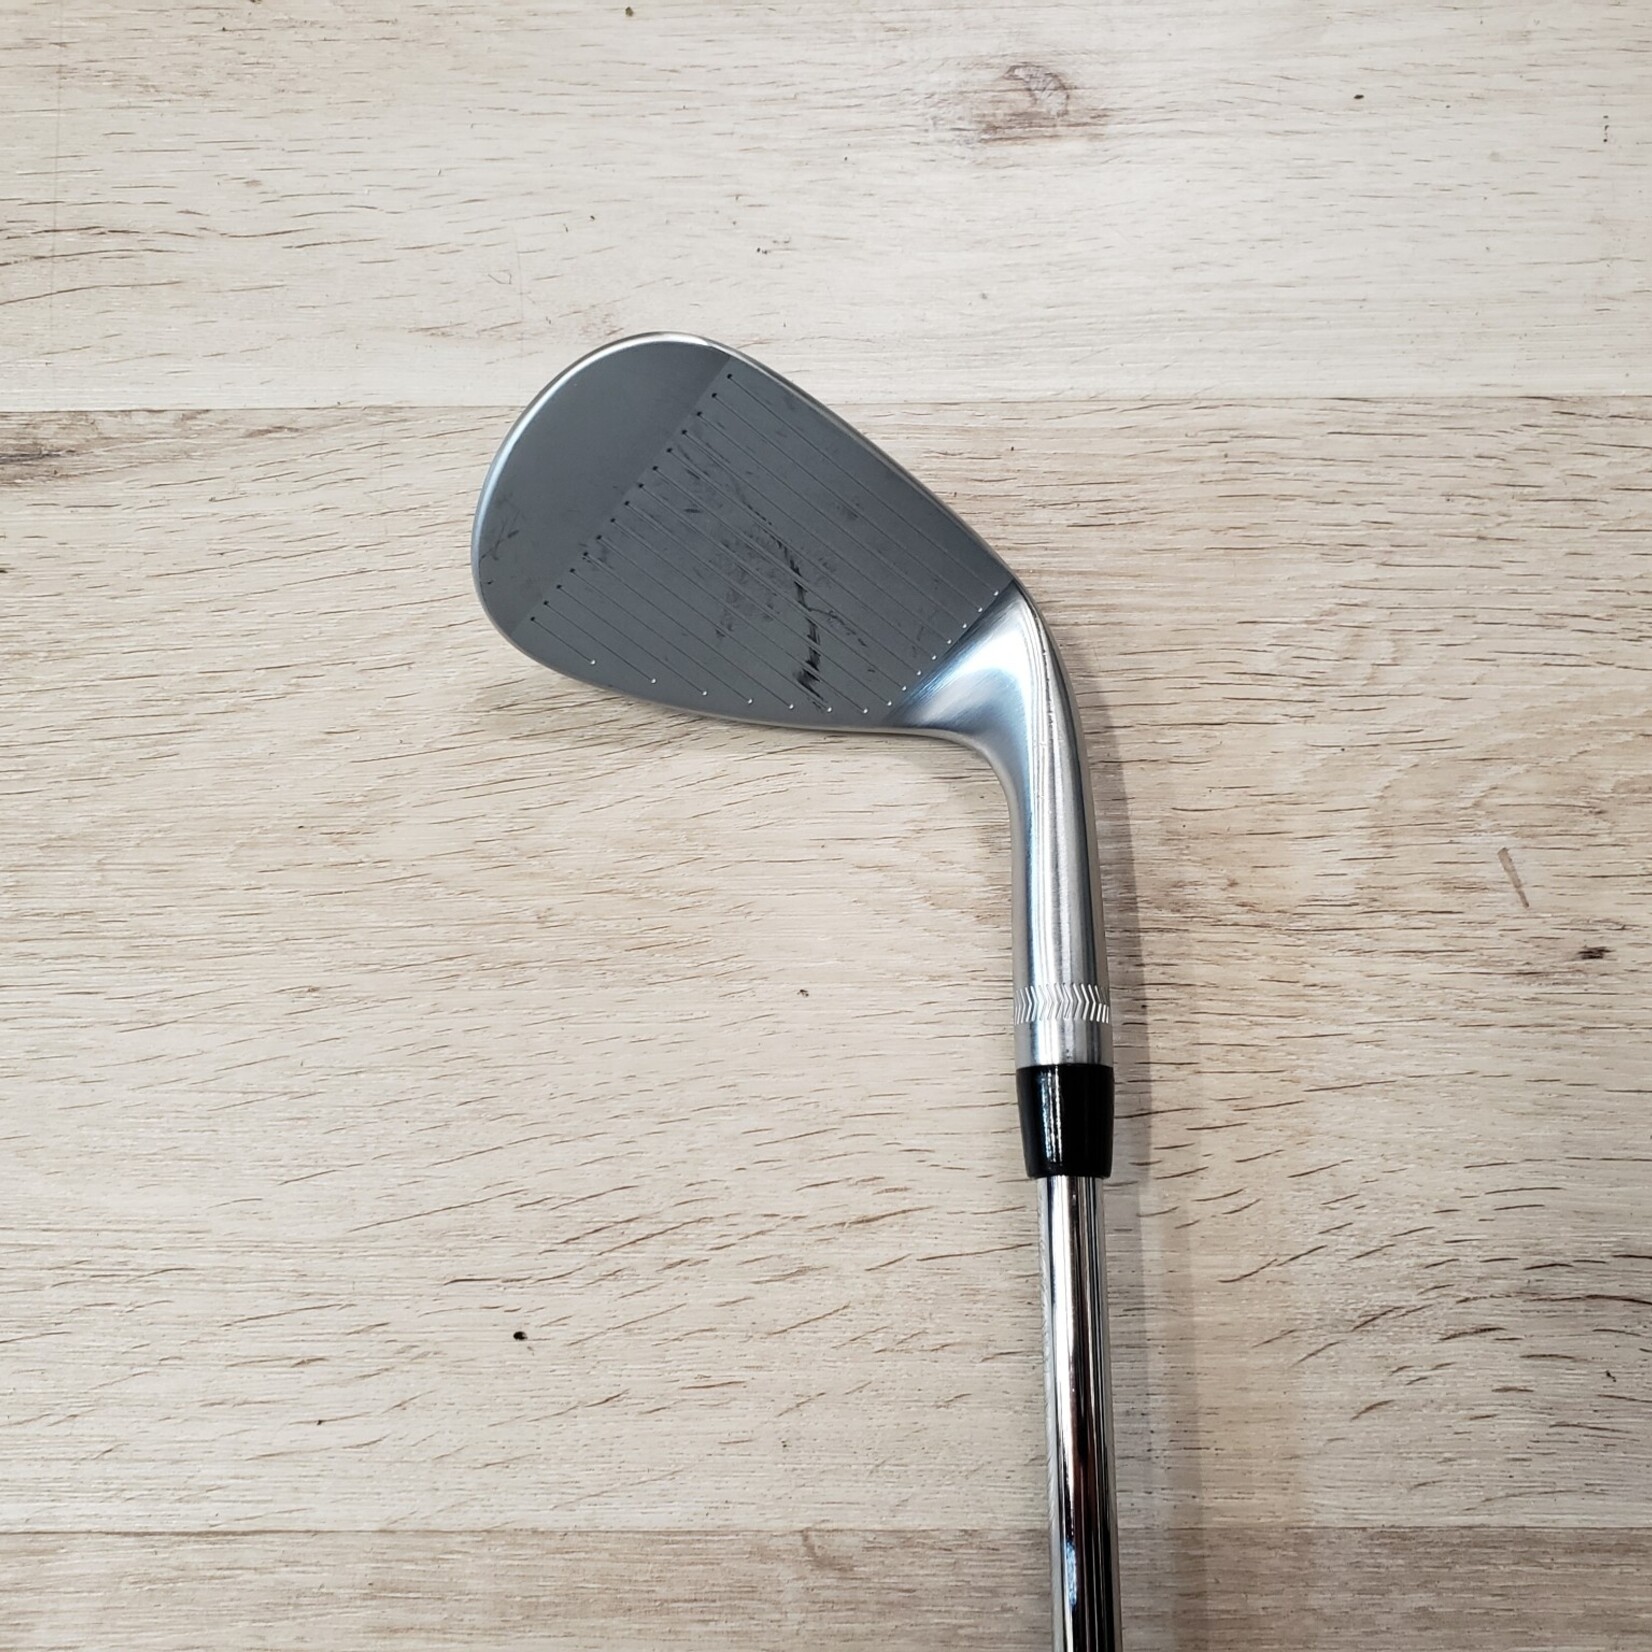 PXG (Pre-owned) PXG 0311 Forged Wedge 56* 10* Stiff Flex (LH)